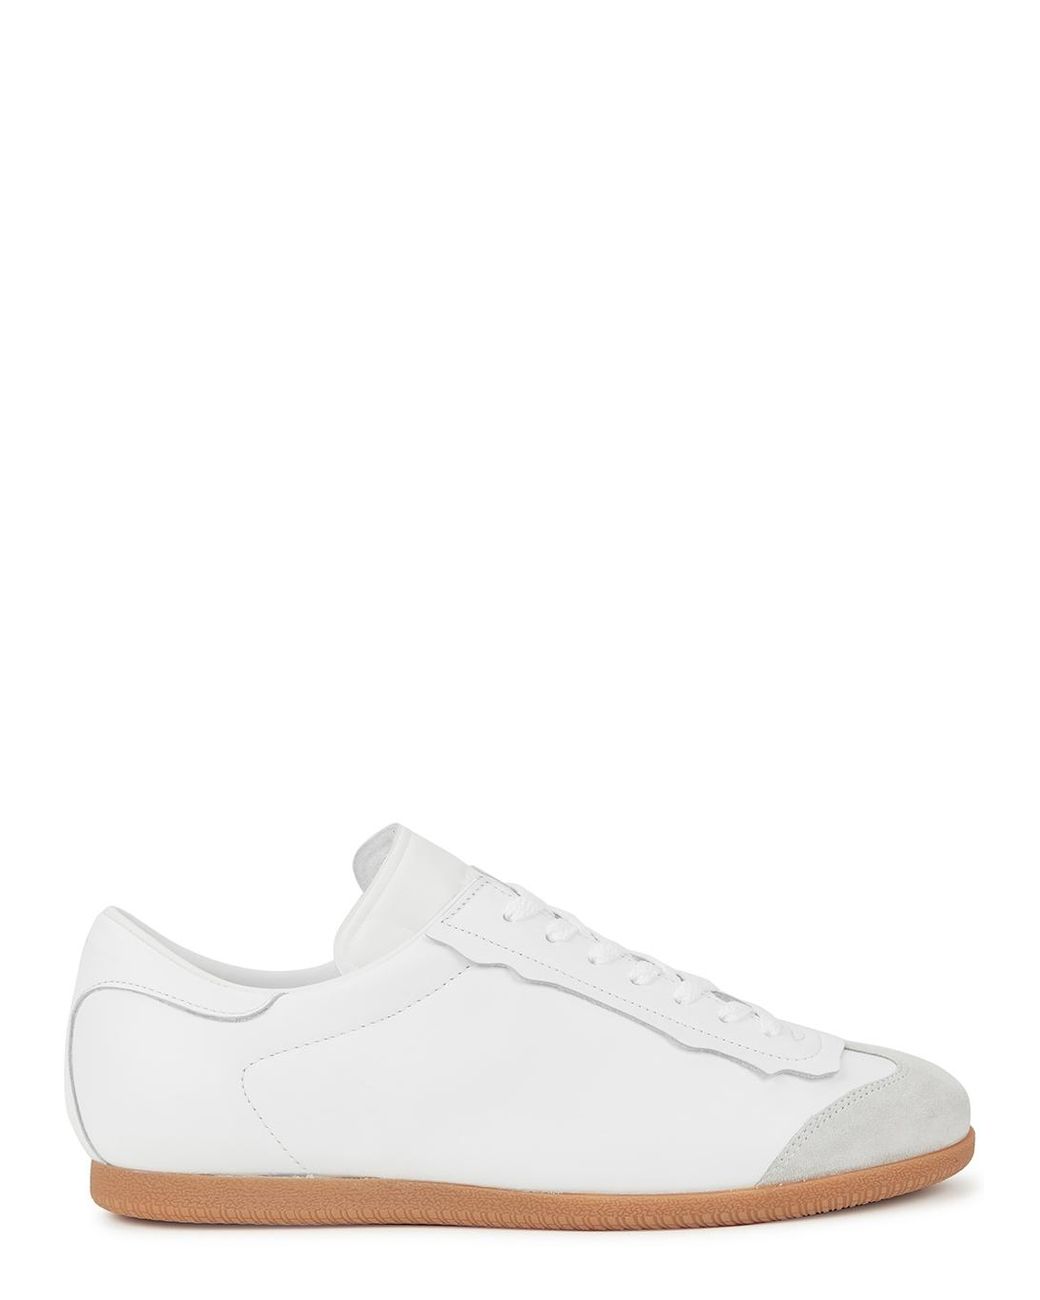 Maison Margiela Featherlight Leather Sneakers in White for Men | Lyst